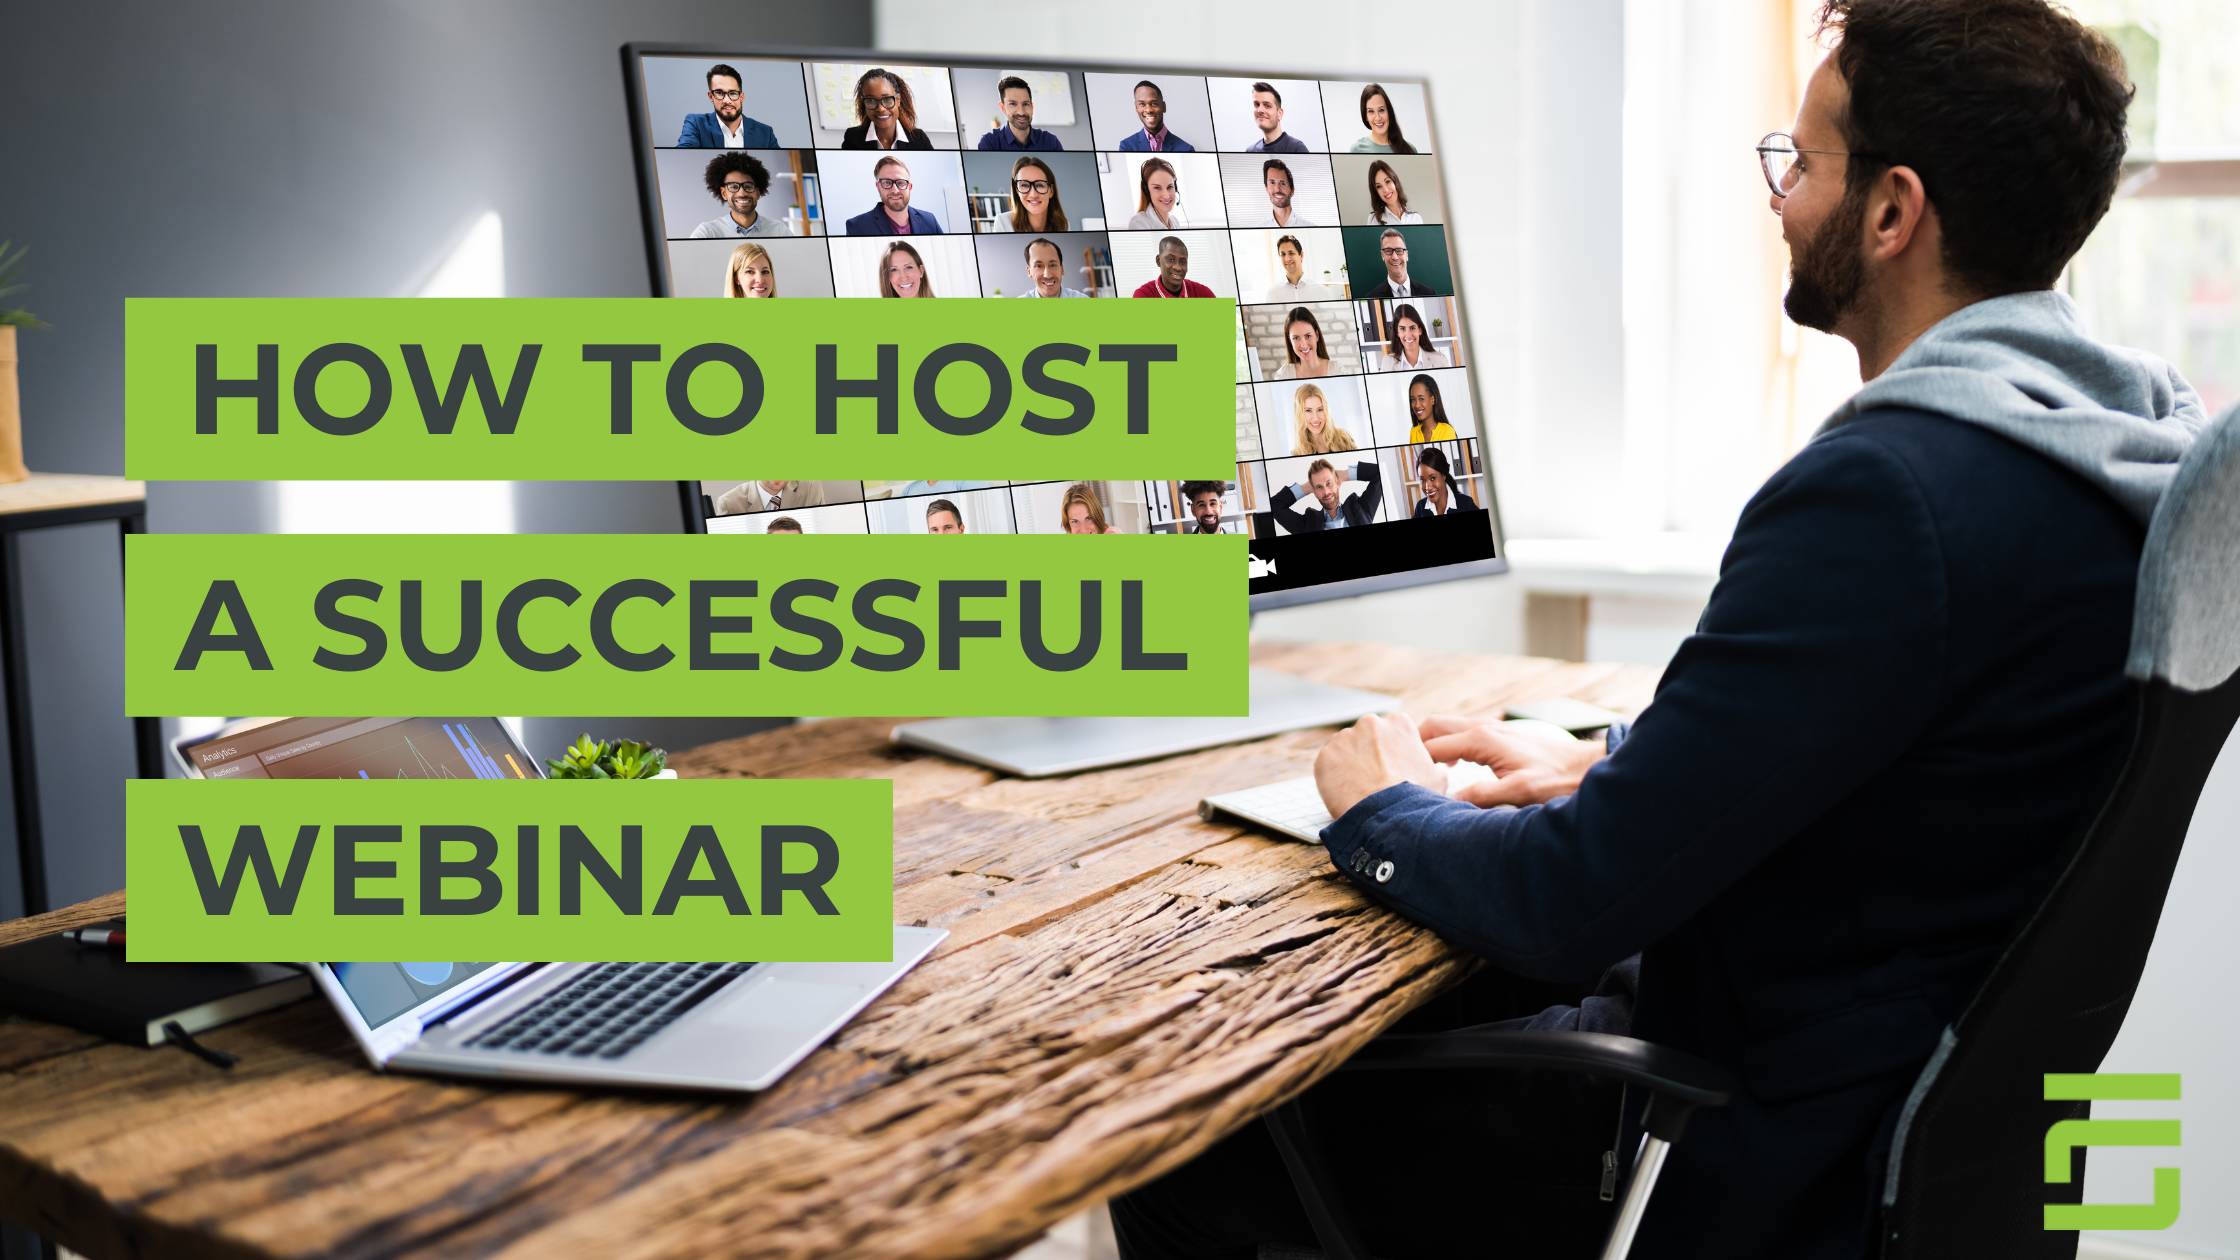 How to Host A Successful Webinar